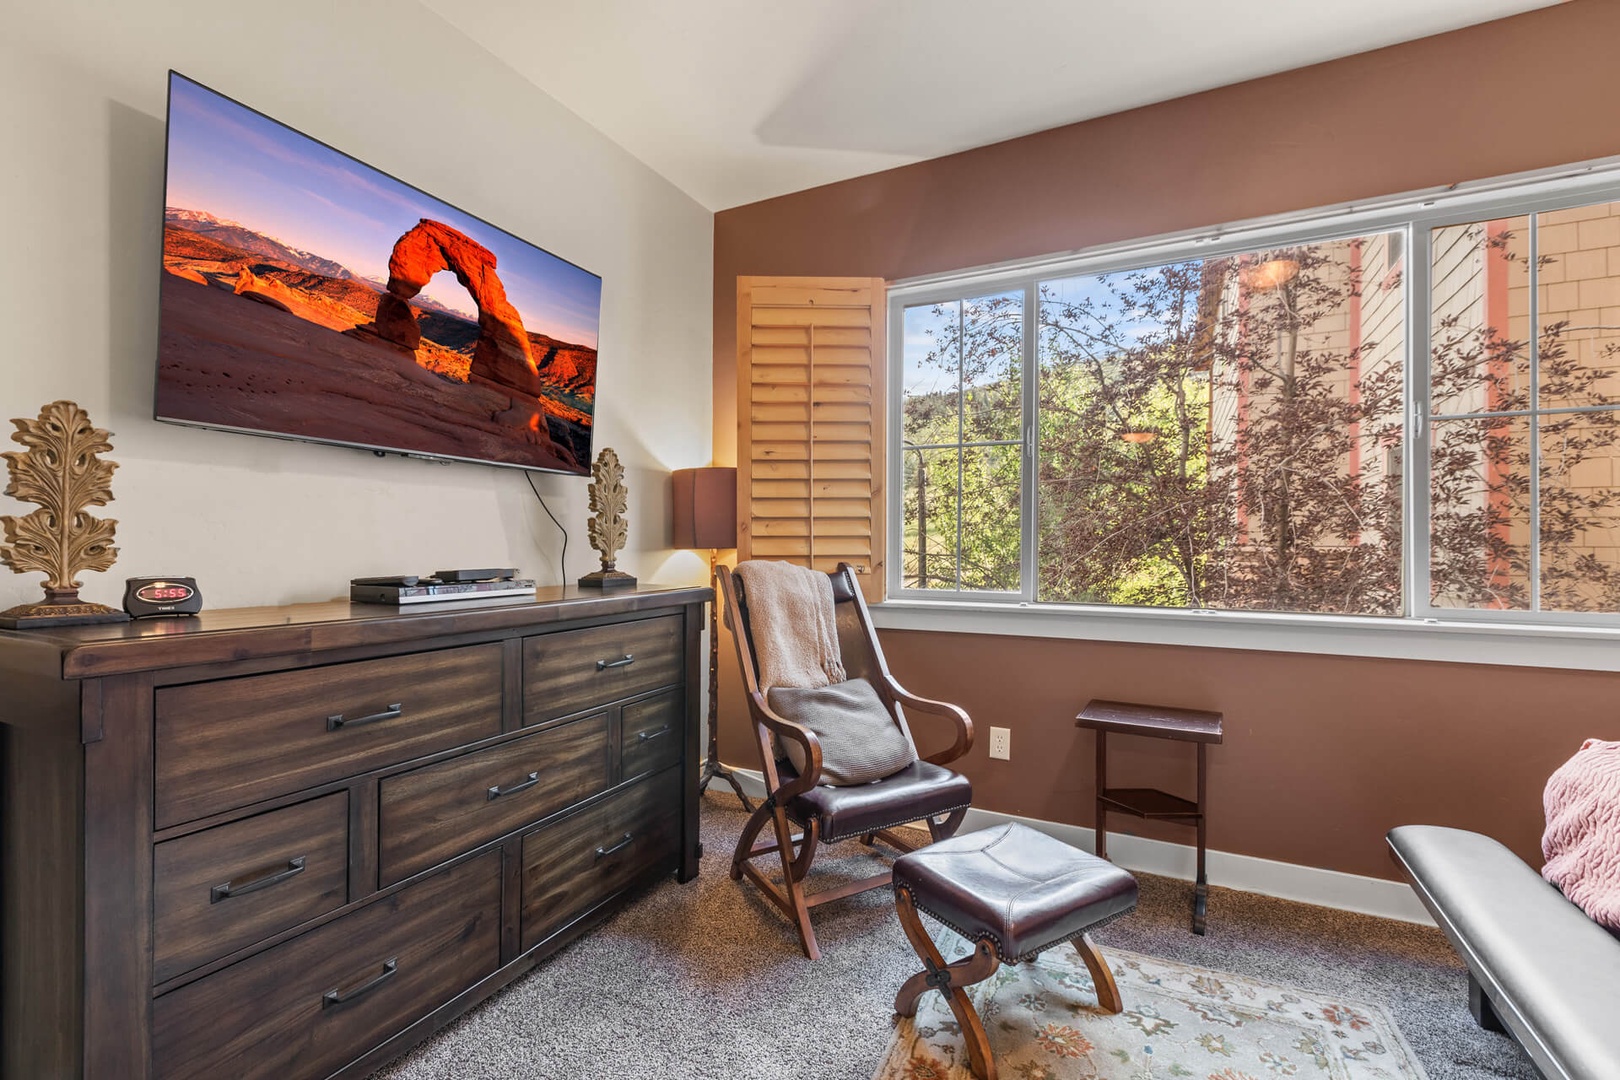 Bear Hollow Lodges 1304: This Master bedroom retreat has a great view, a king bed and attached bathroom.